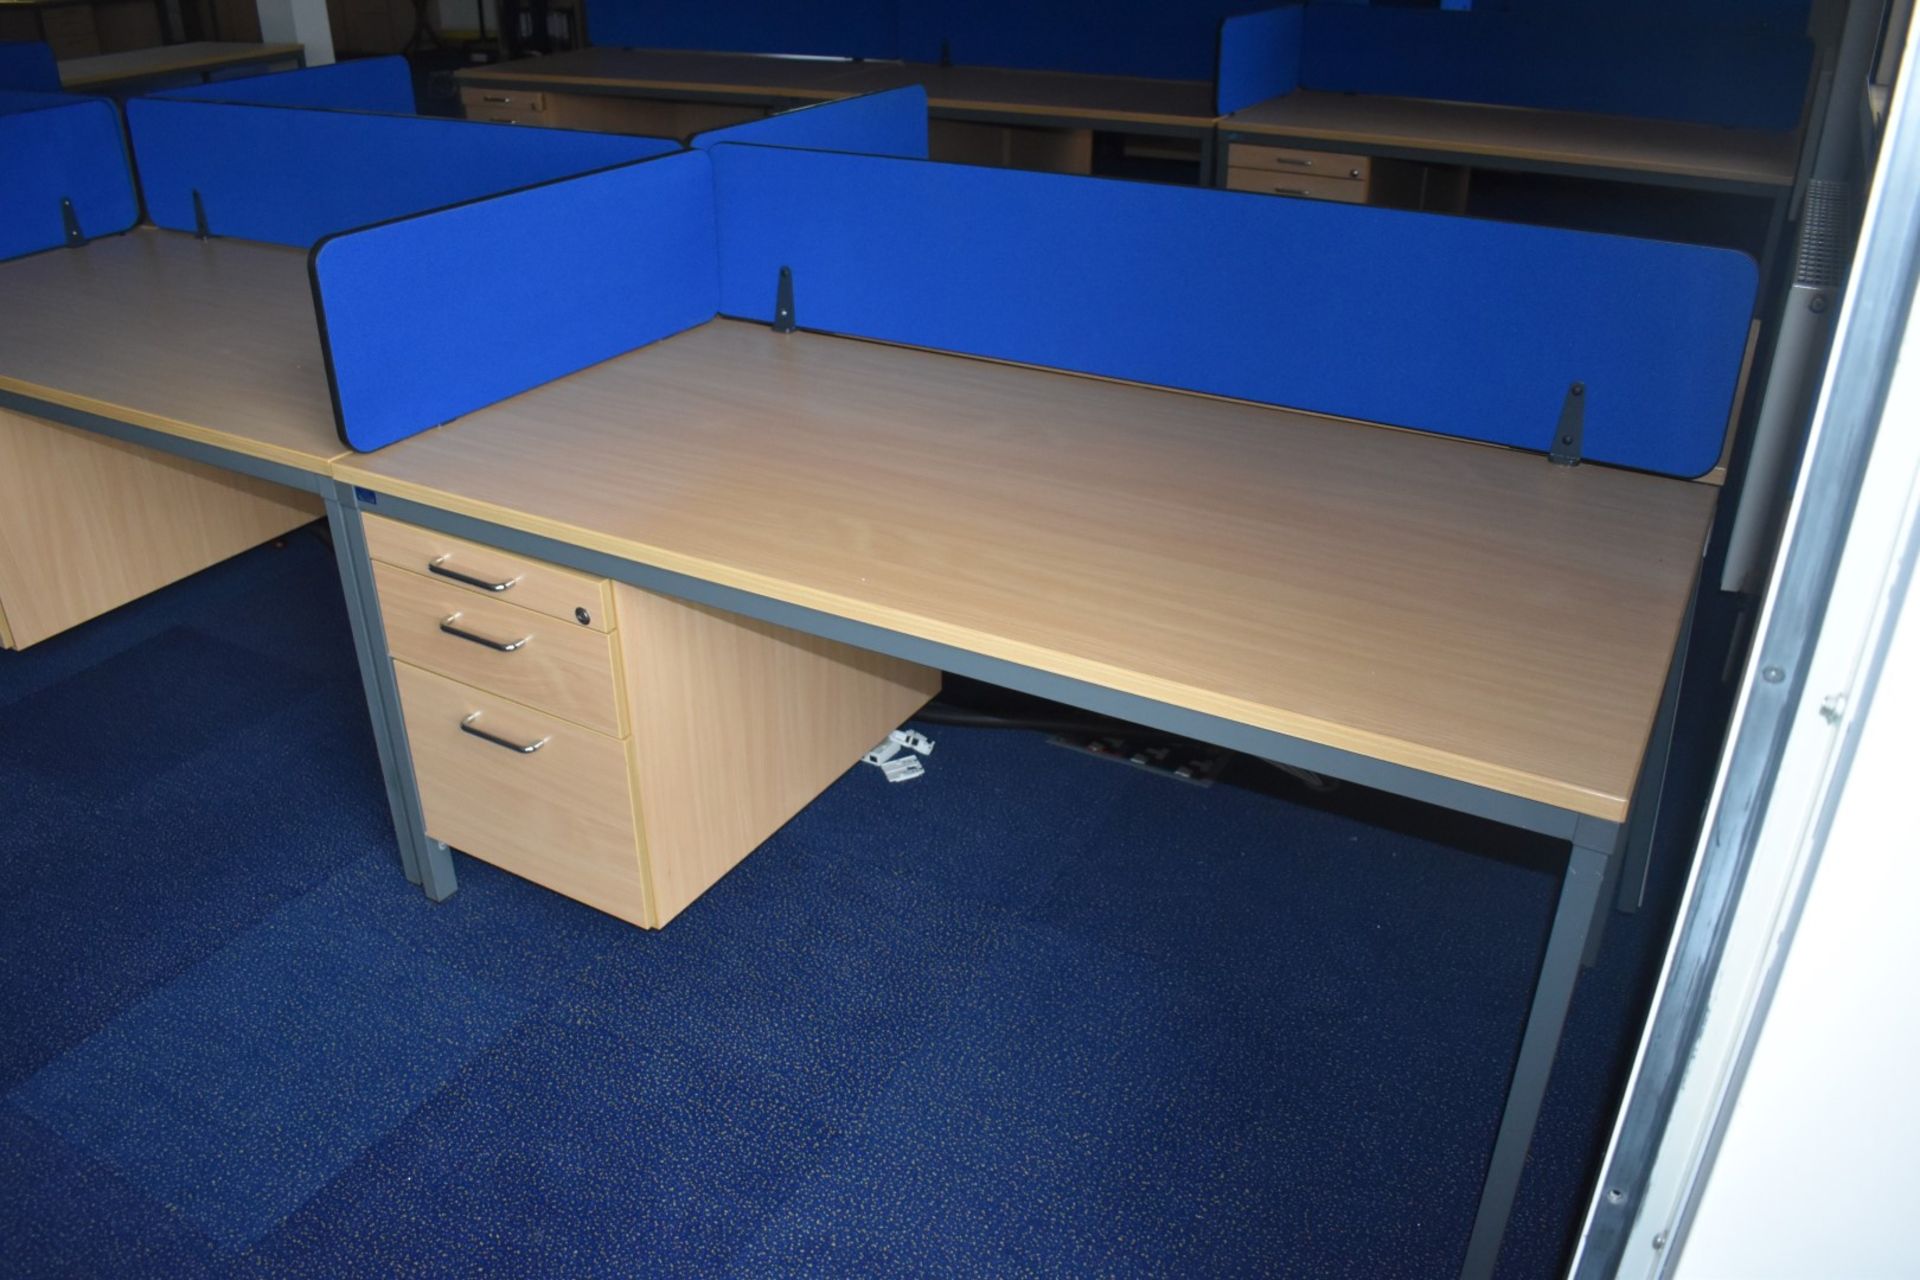 7 x Beech Office Desks With Integrated Drawer Pedestals and Privacy Partitions - Size of Each Desk - Image 2 of 10